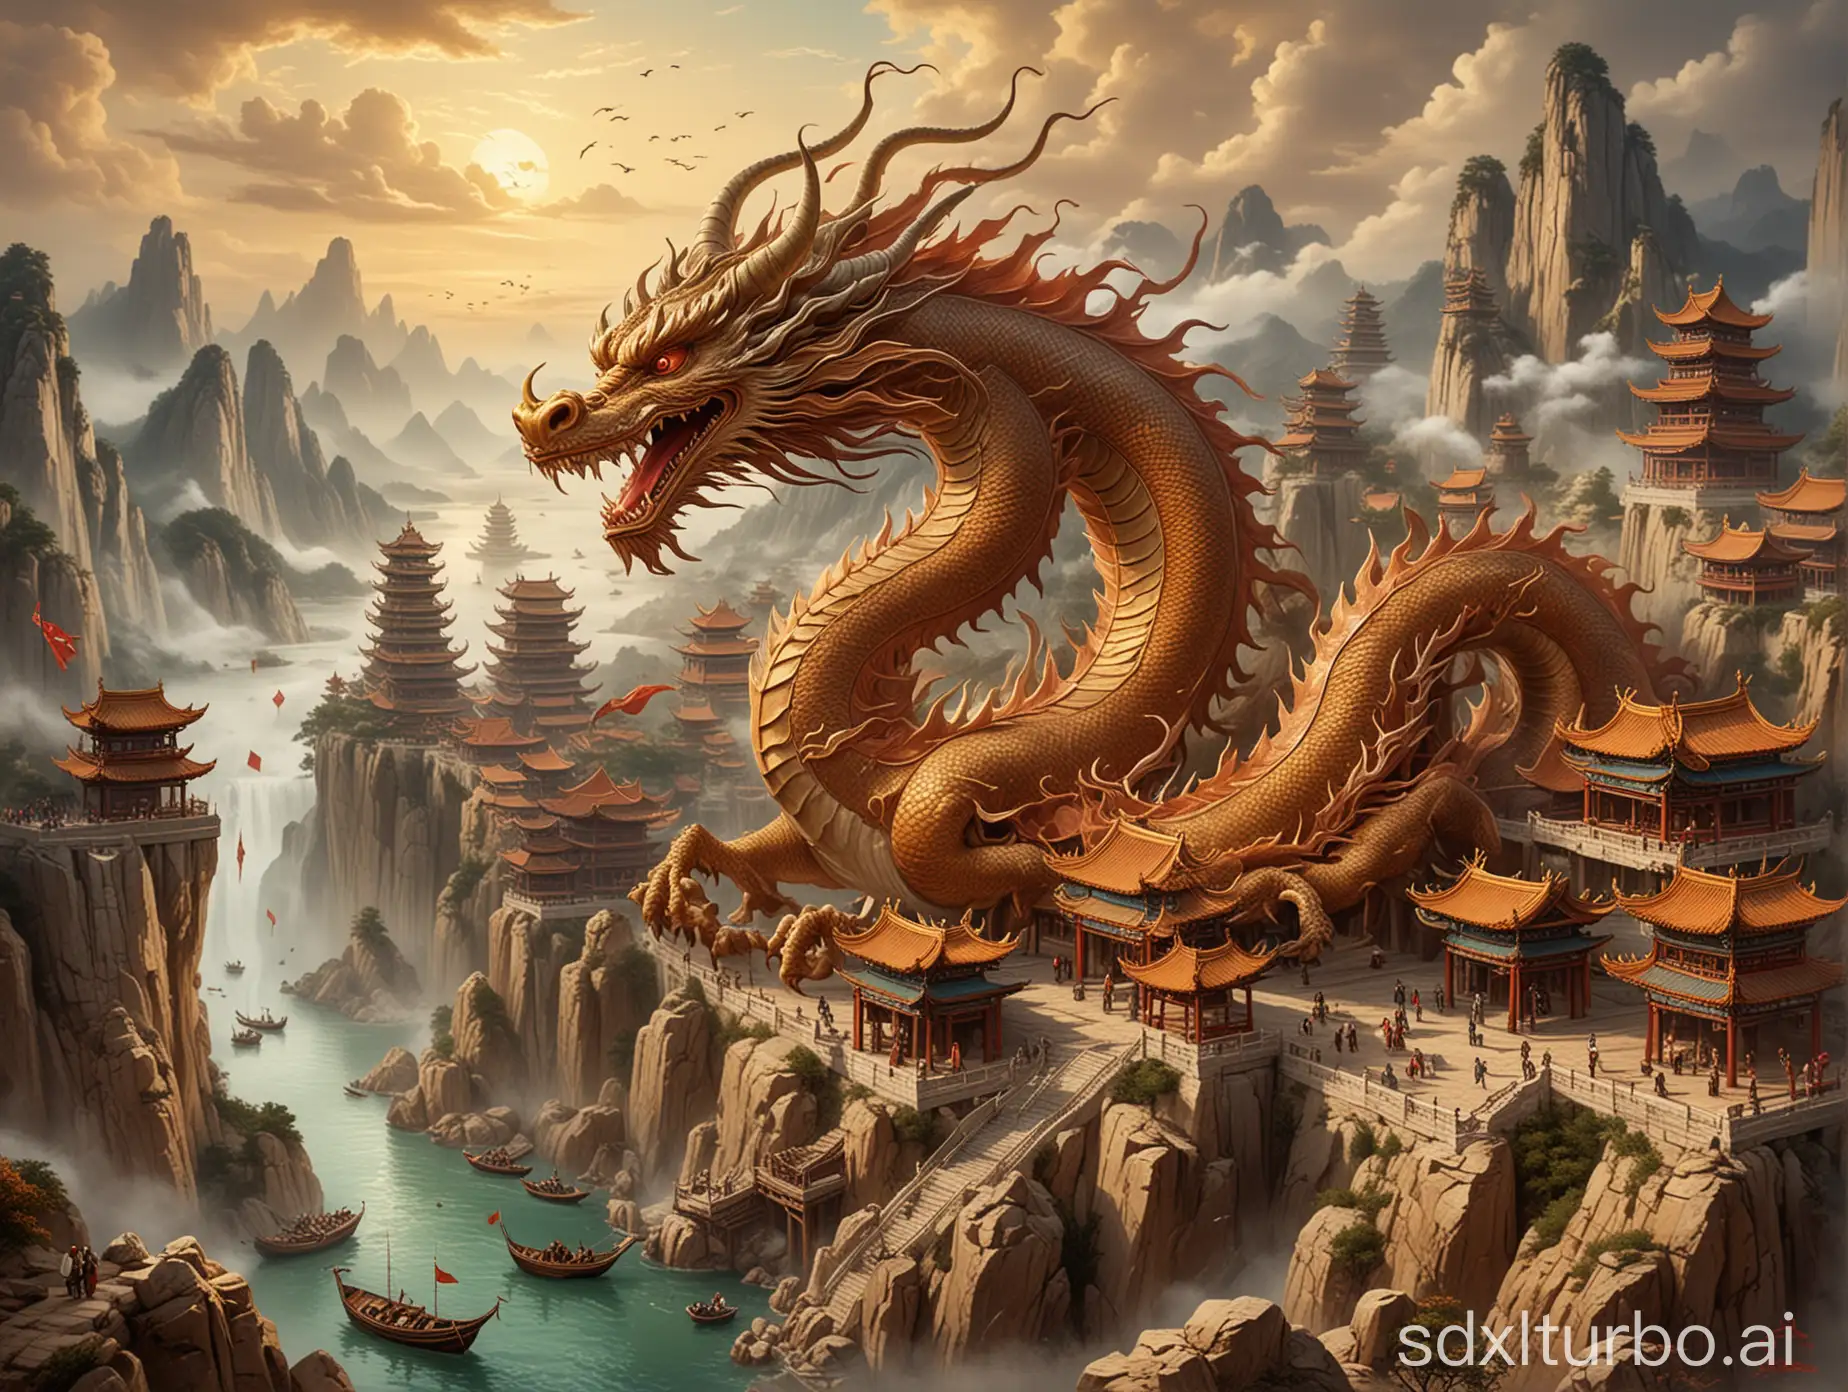 Chinese-Dream-Celebrating-Chinas-Cultural-Heritage-with-Majestic-Dragon